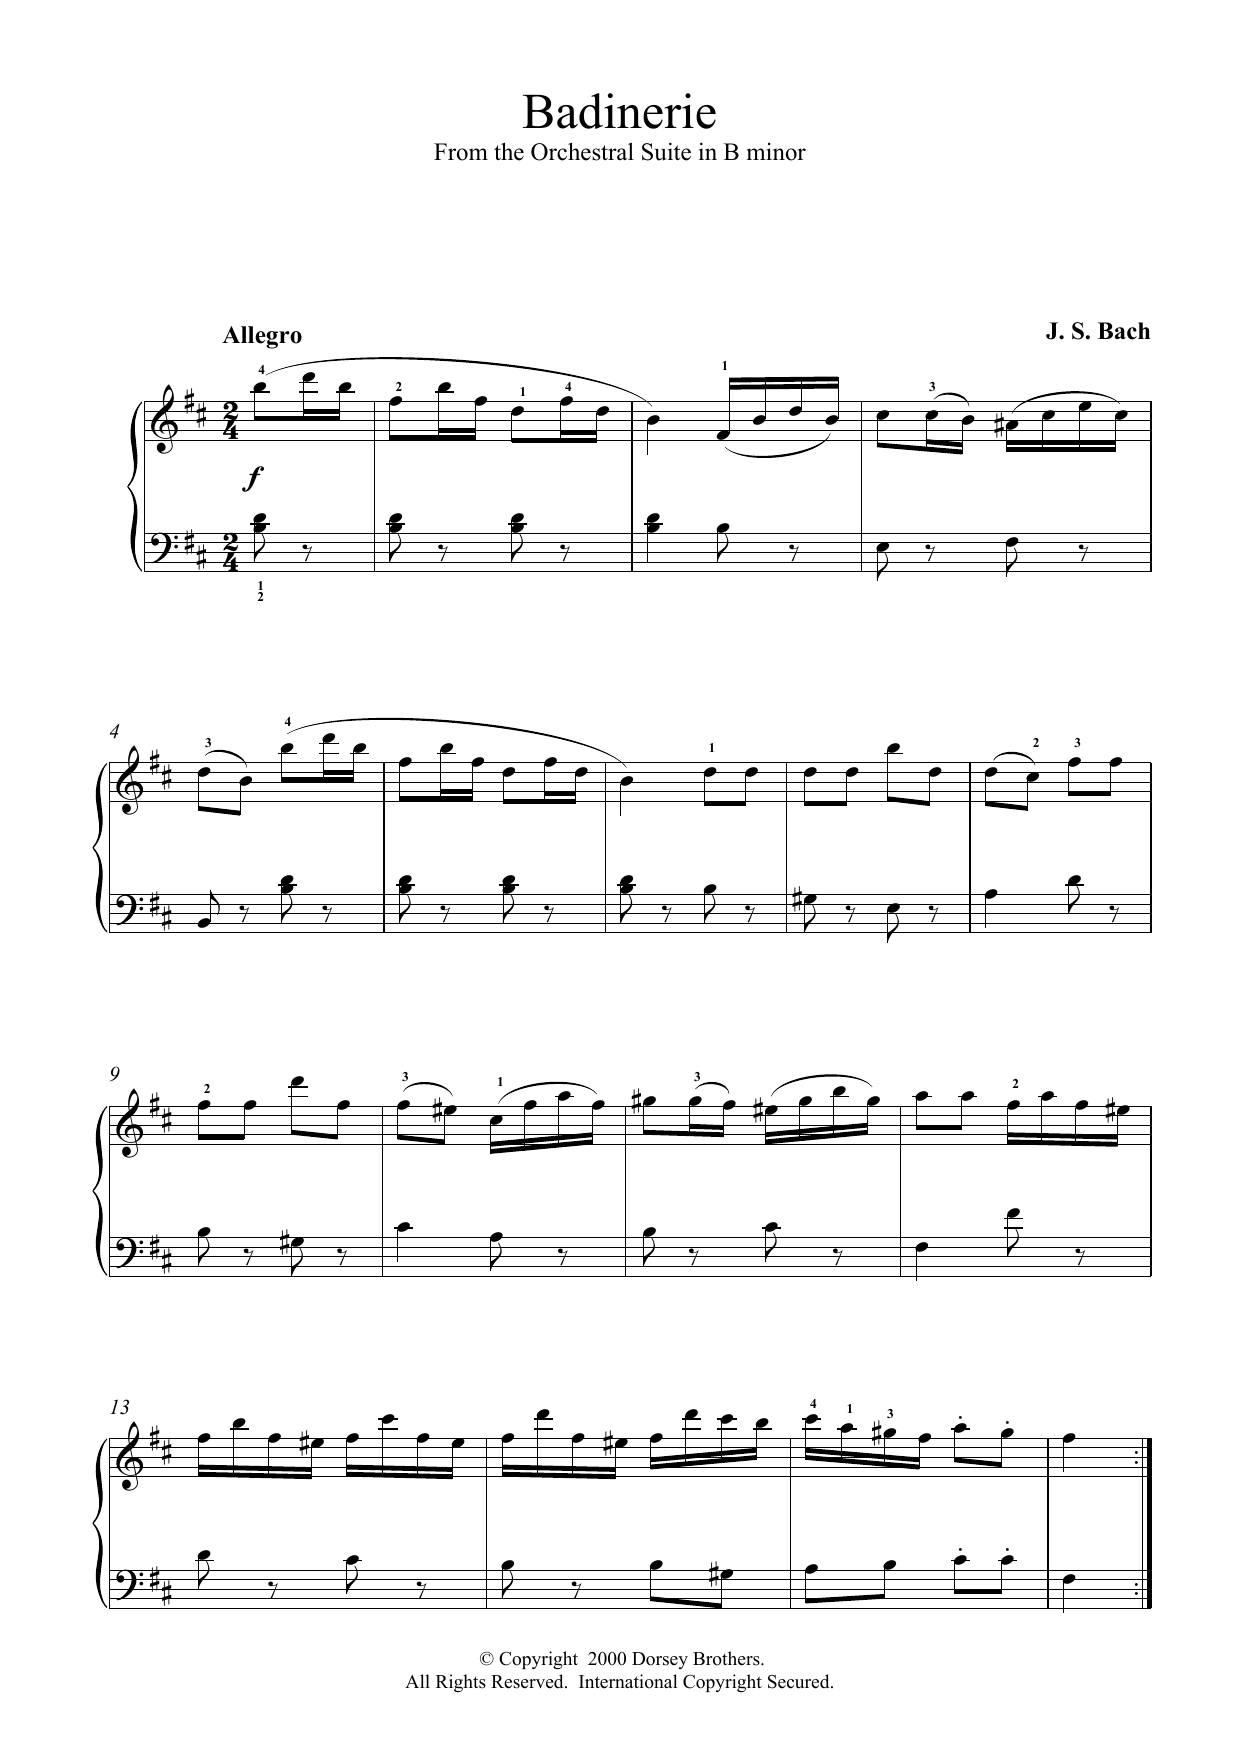 Johann Sebastian Bach Badinerie (from Orchestral Suite No. 2 in B Minor) sheet music notes and chords. Download Printable PDF.